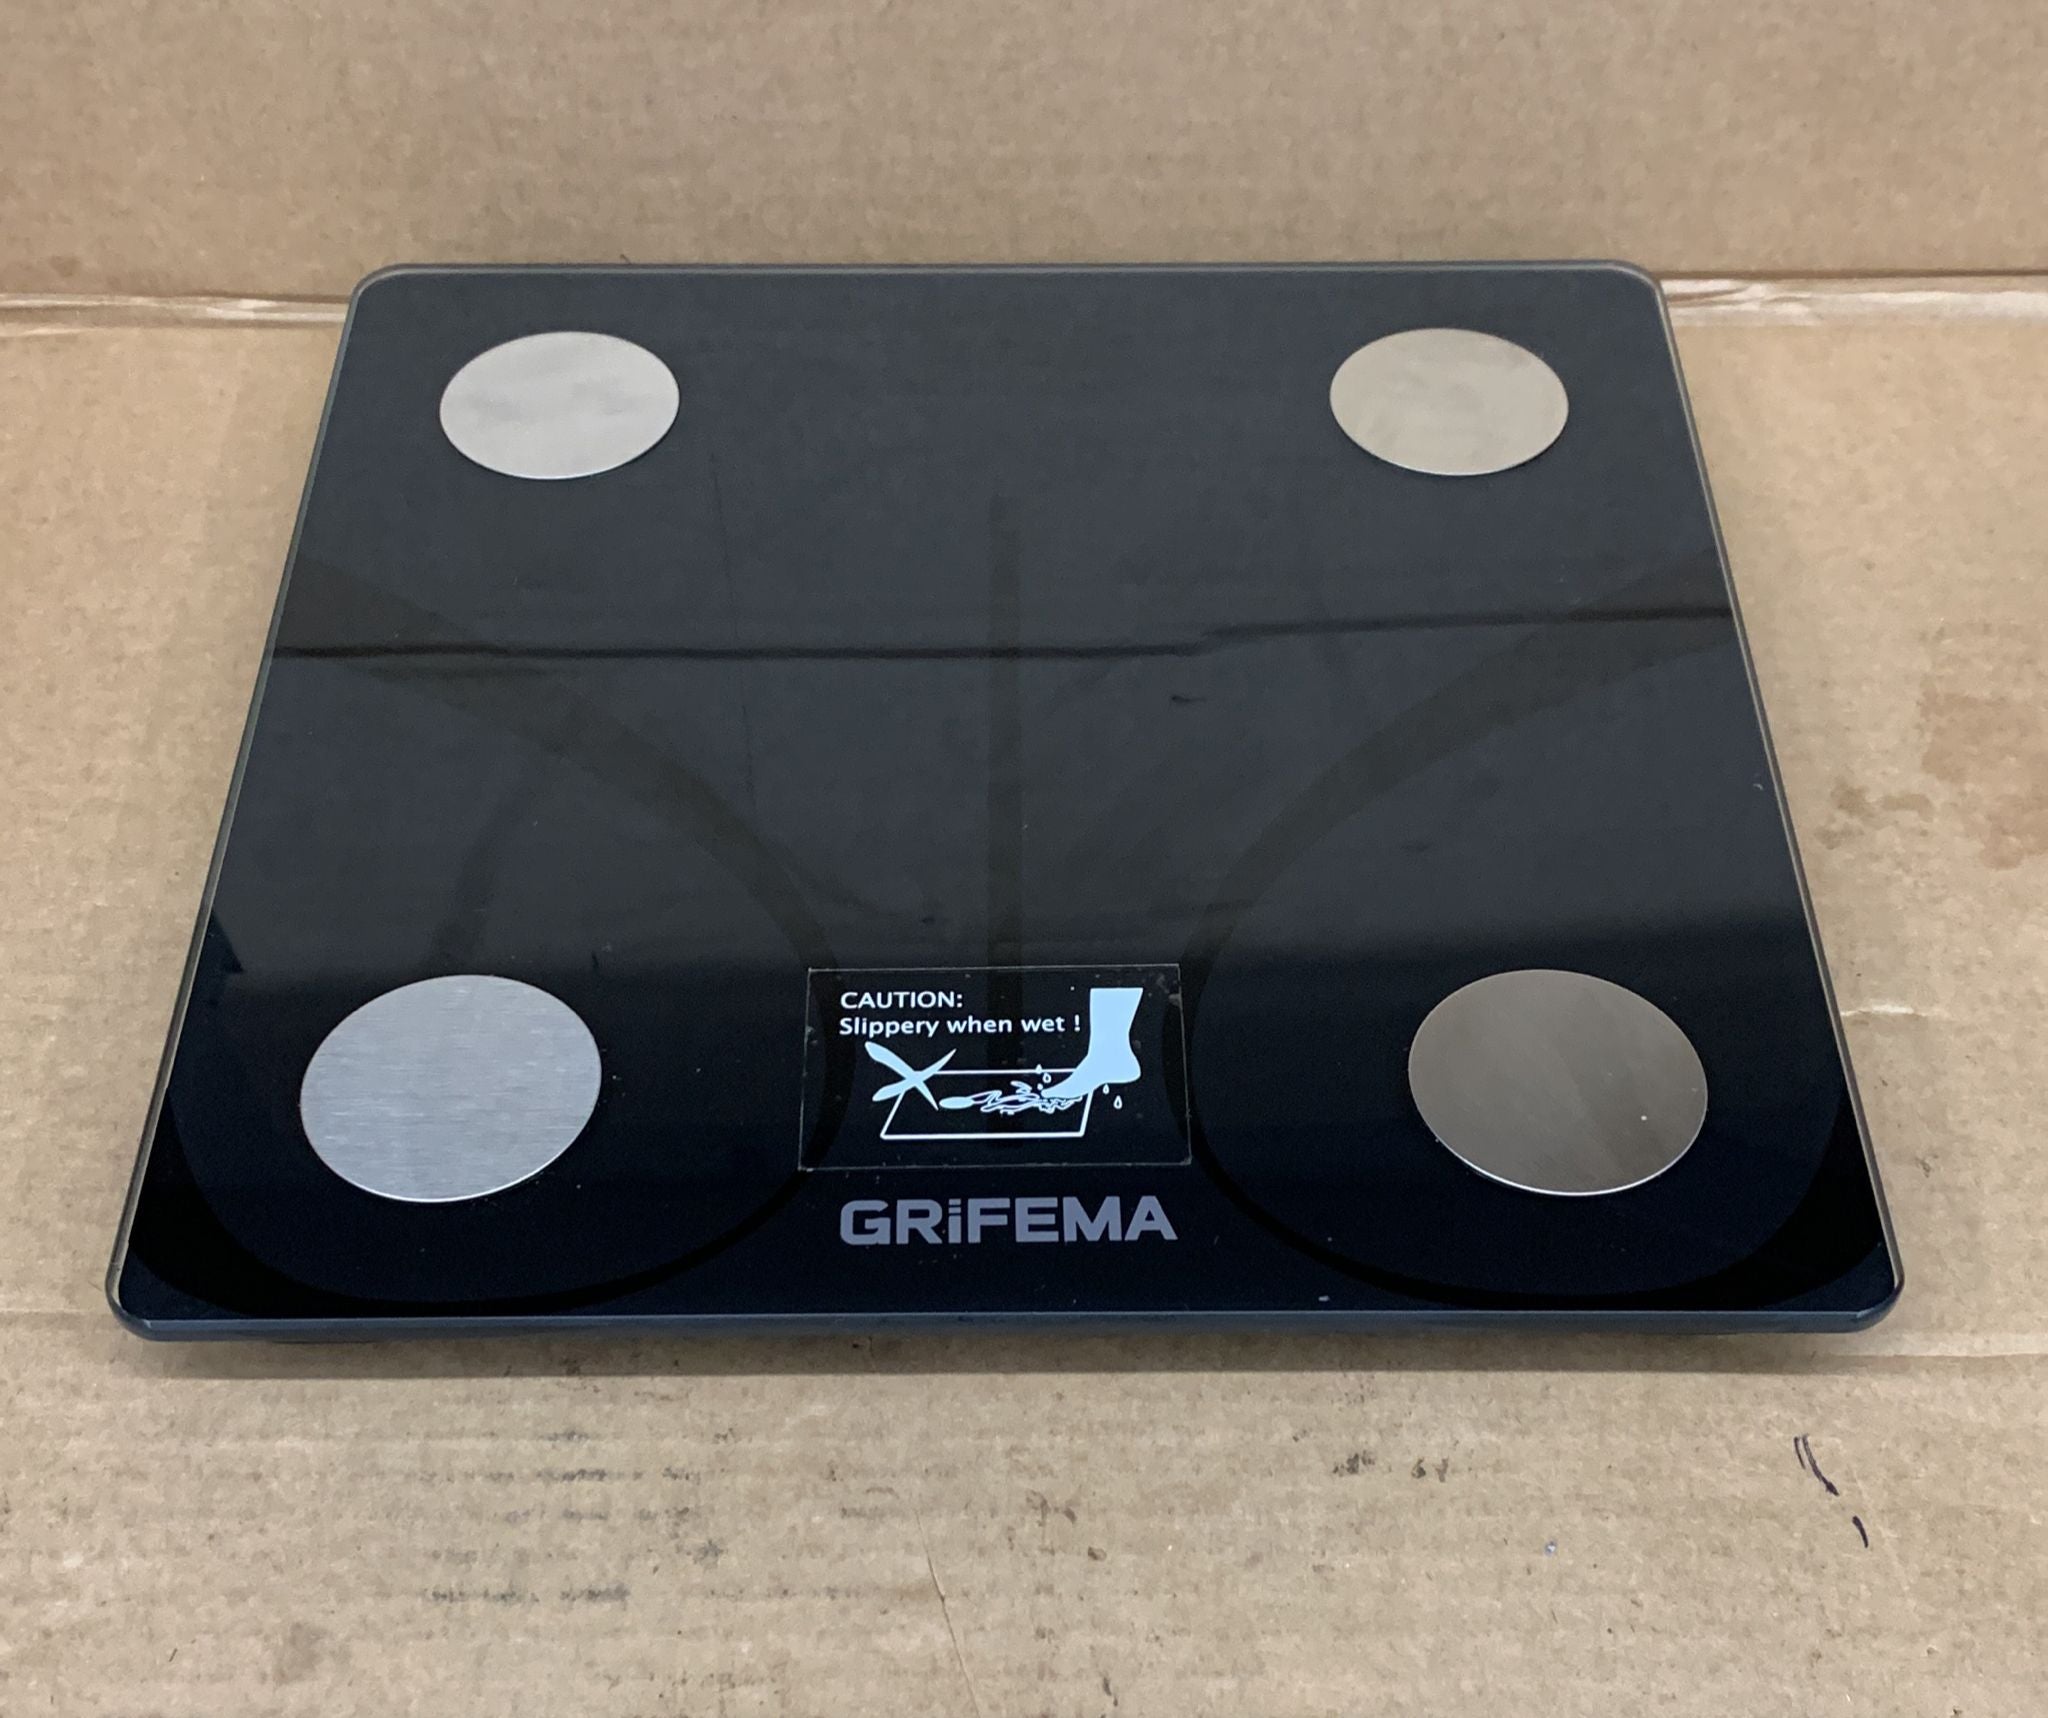 GRIFEMA GA2001 Weighing Scales for Body Weight and Fat-Black -6721